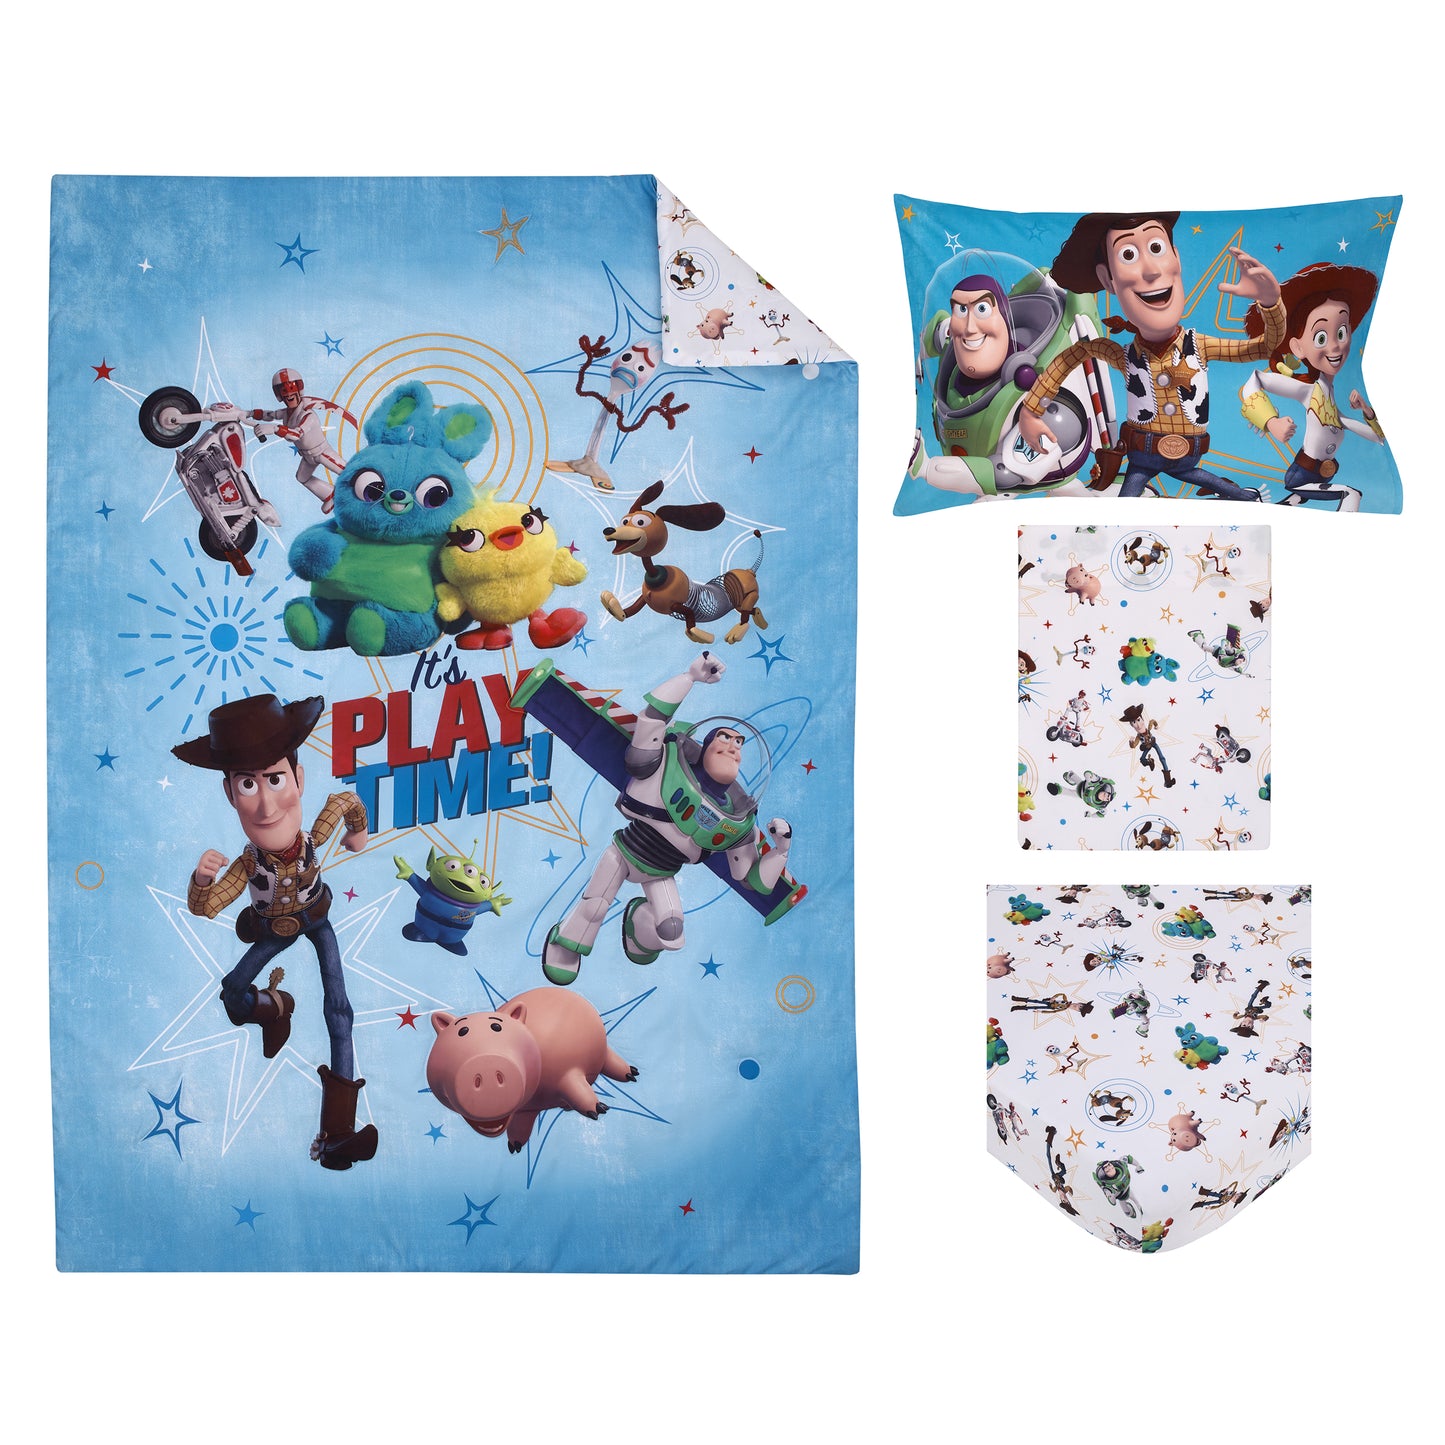 Disney Toy Story It's Play Time Blue, Green, Red, and Yellow, Woody and Buzz 4 Piece Toddler Bed Set - Comforter, Fitted Bottom Sheet, Flat Top Sheet, and Reversible Pillowcase